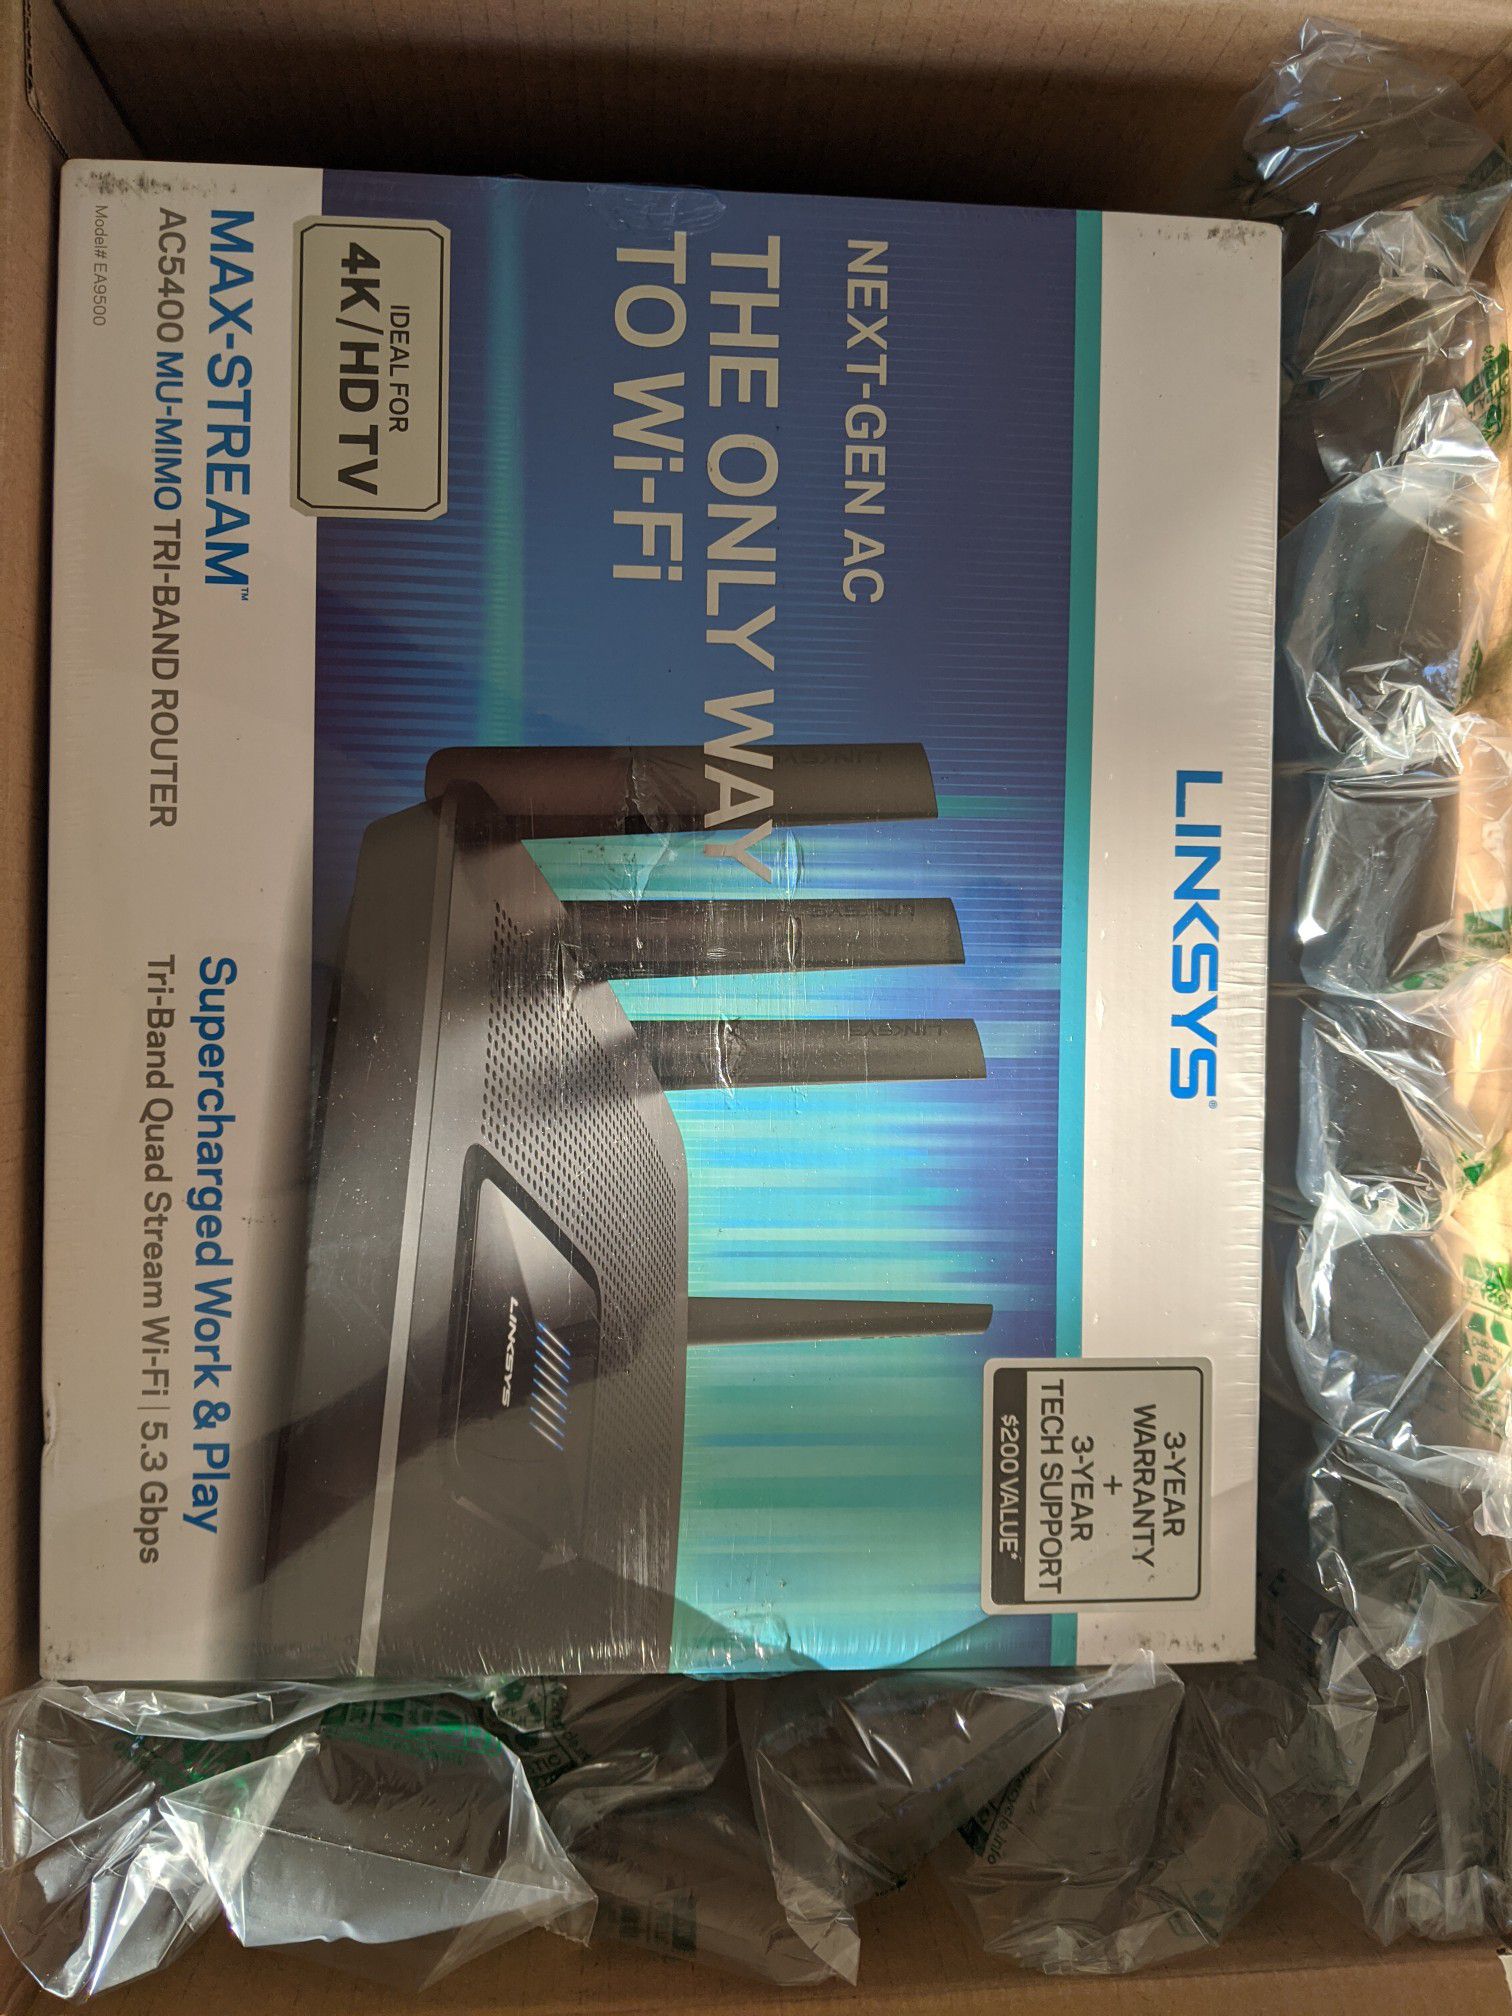 Linksys Tri-Band Wifi Router for Home (Max-Stream AC5400 MU-Mimo Fast